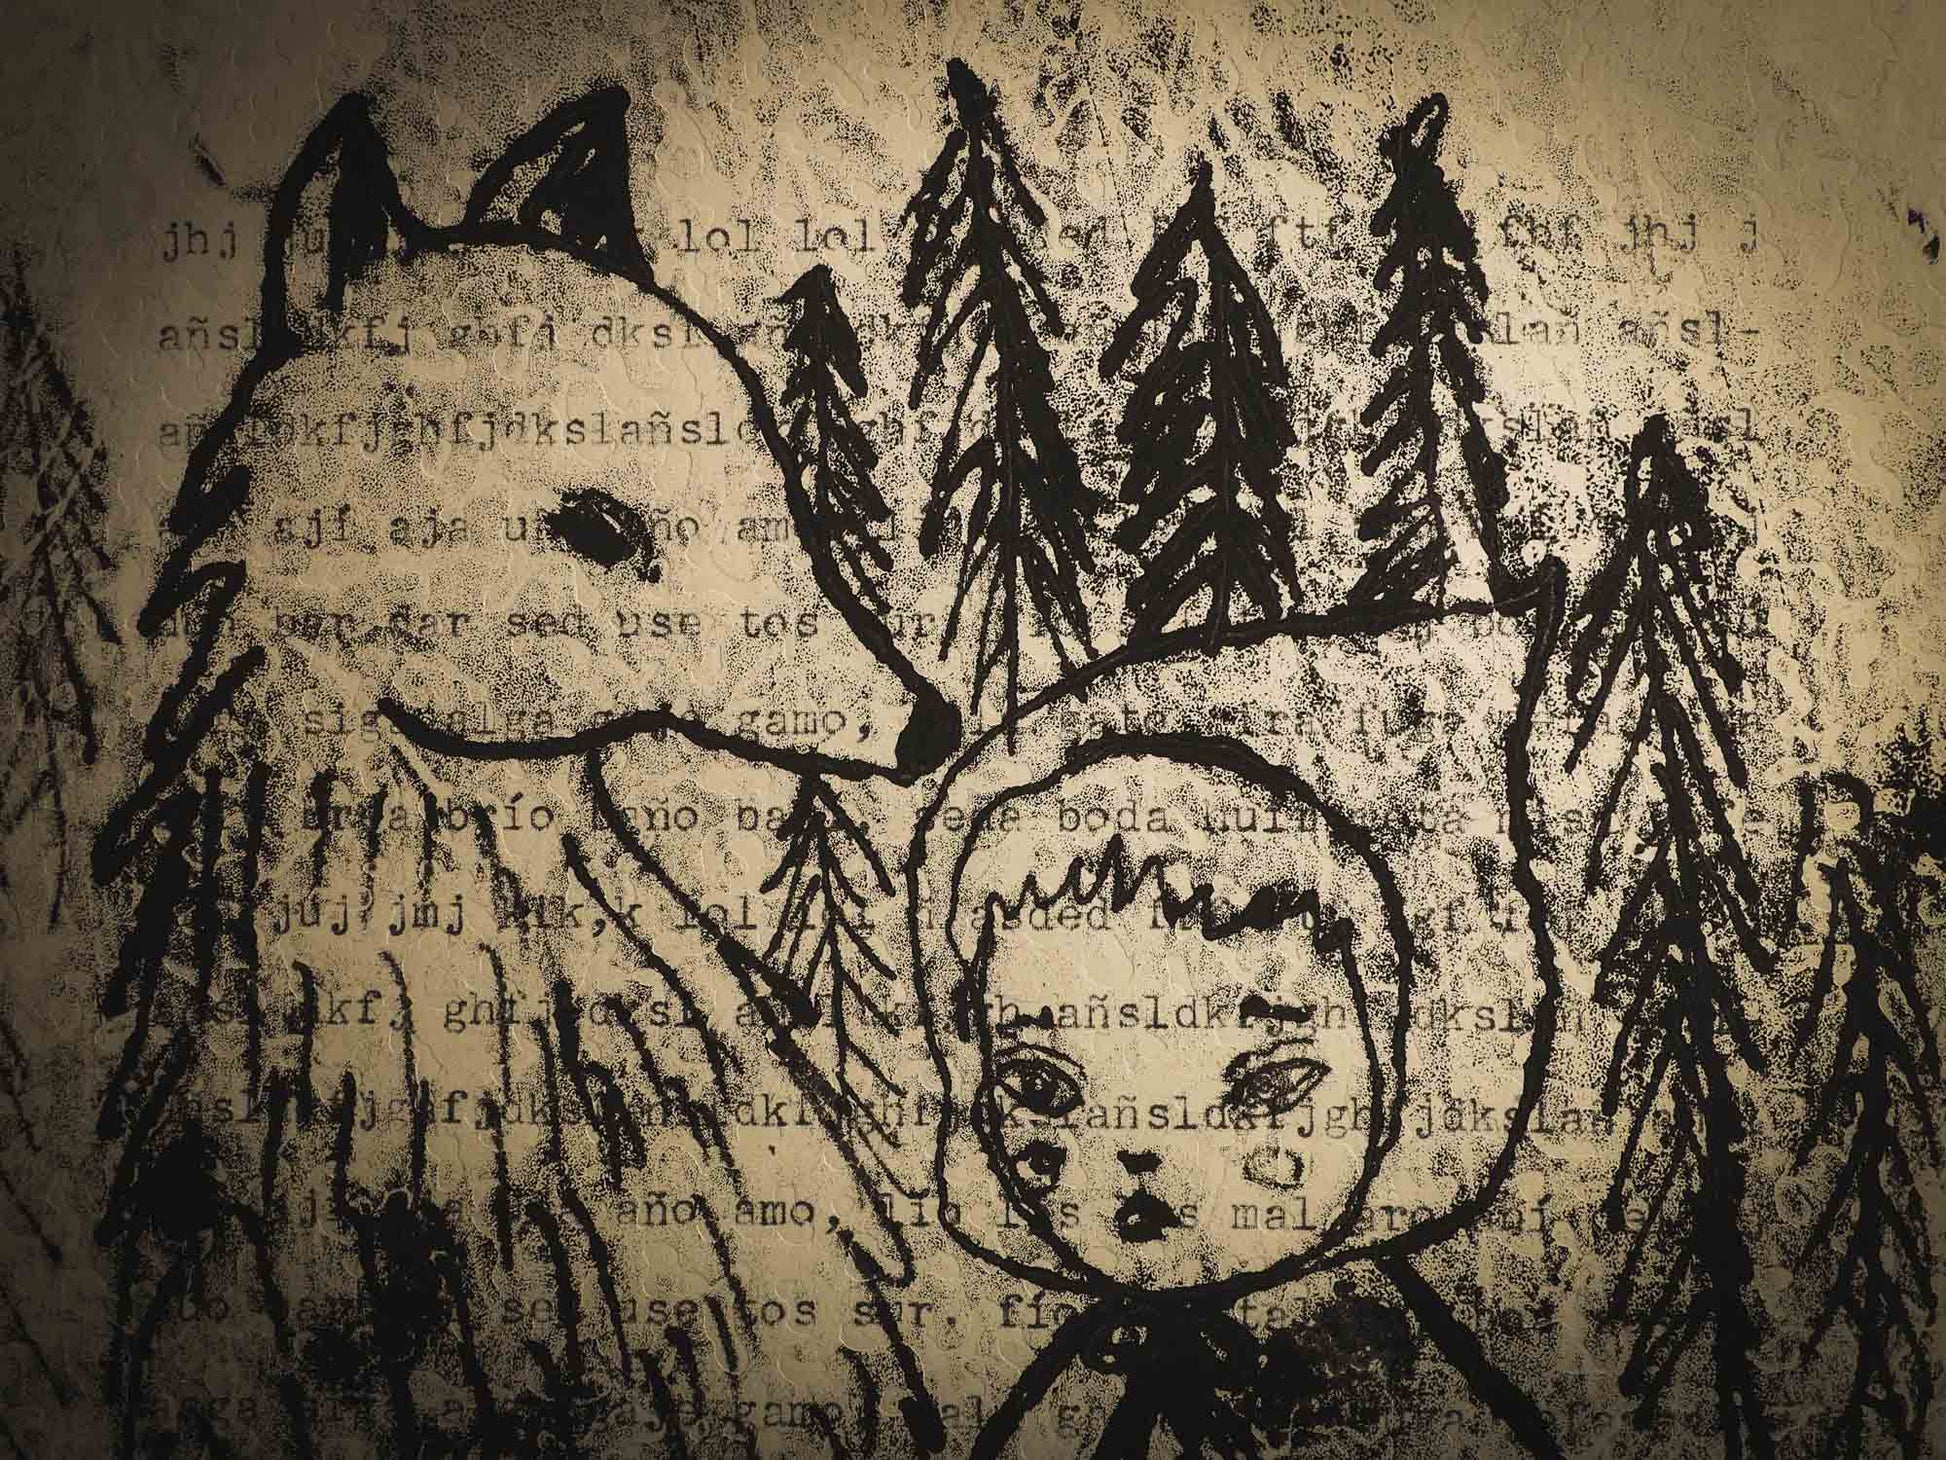 An original ink monoprint by Idania Salcido (Danita Art), this painting measures 7 x 11 inches on a fancy paper with mechanography exercises, dated from early 20th century. In my world, Little Red Riding Hood and The Wolf are friends and companions that play in the deep forest, where no one can bother them. No hunters, No annoying chores, just pure fun in nature.